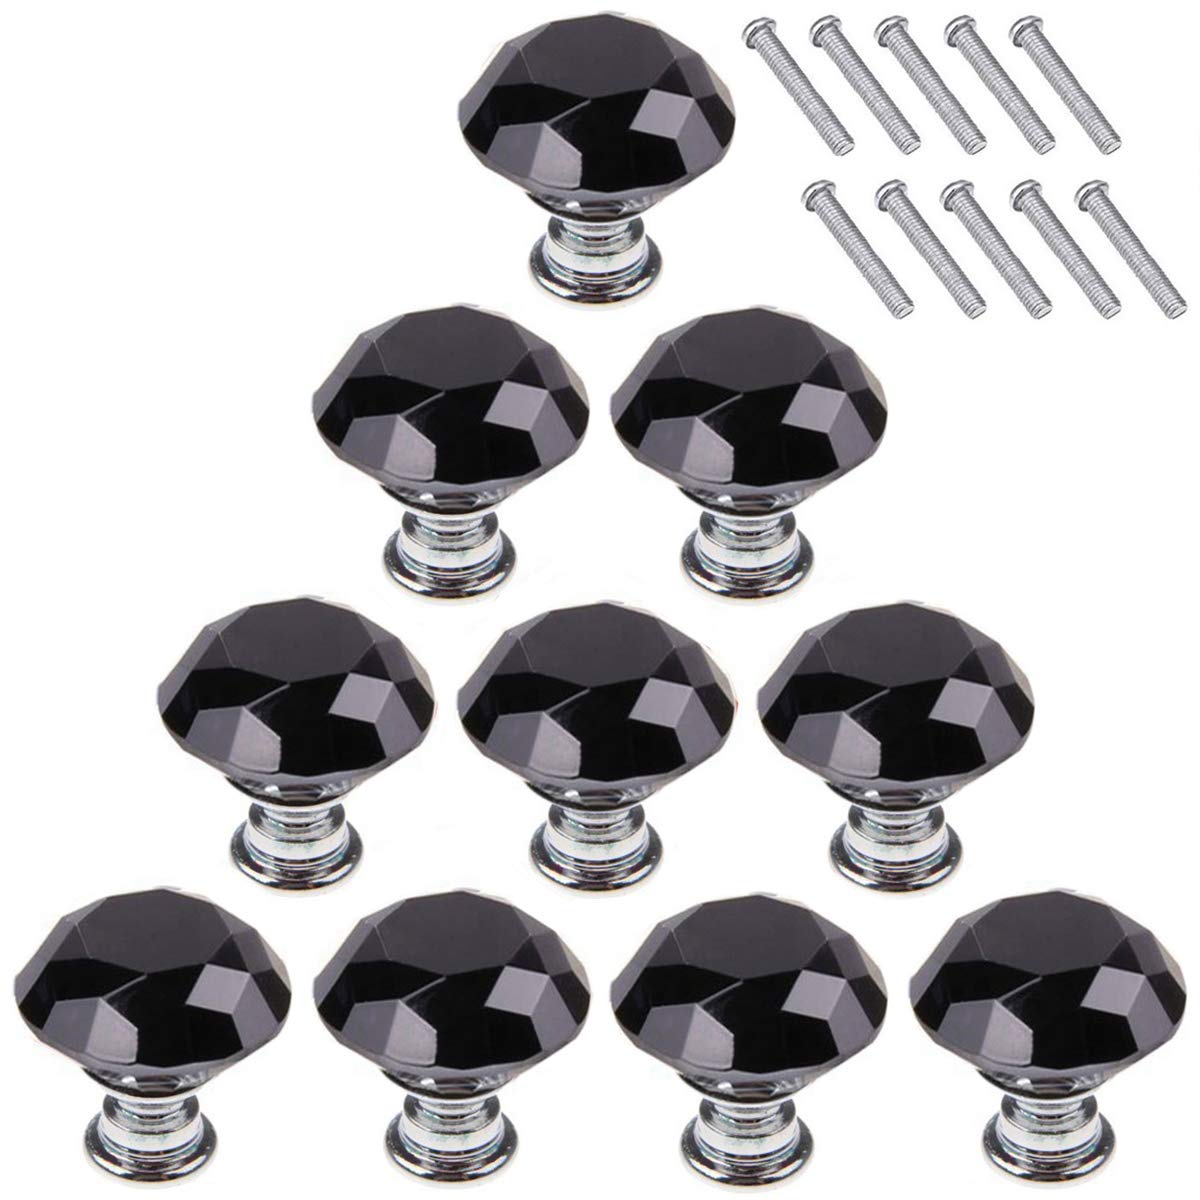 IQUALITE 12pcs Diamond Shape Crystal Glass 30mm Drawer Knob Pull Handle Usd for Cabinet Drawer IQ_01